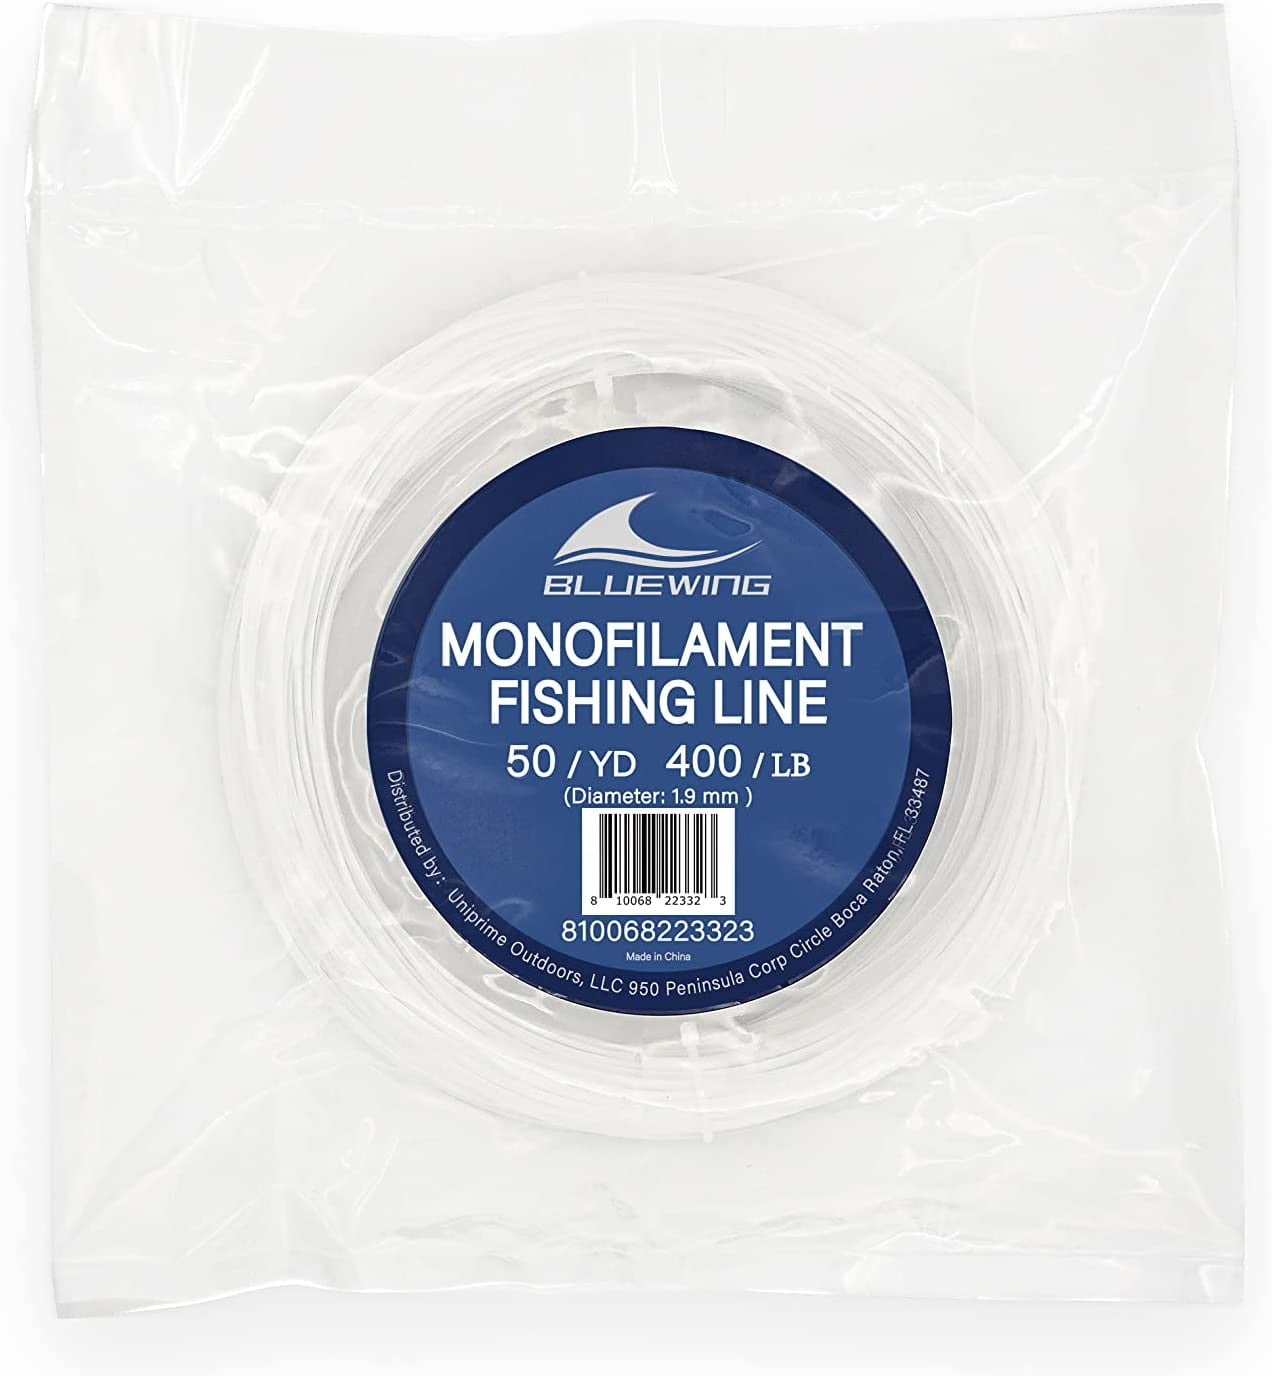 Bluewing Monofilament Fishing Line Clear Invisible Thin Diameter Fishing String Mono Fishing Line, Dia.1.6mm*100YD*300LB, Size: Size10 100yd/ 300lb/